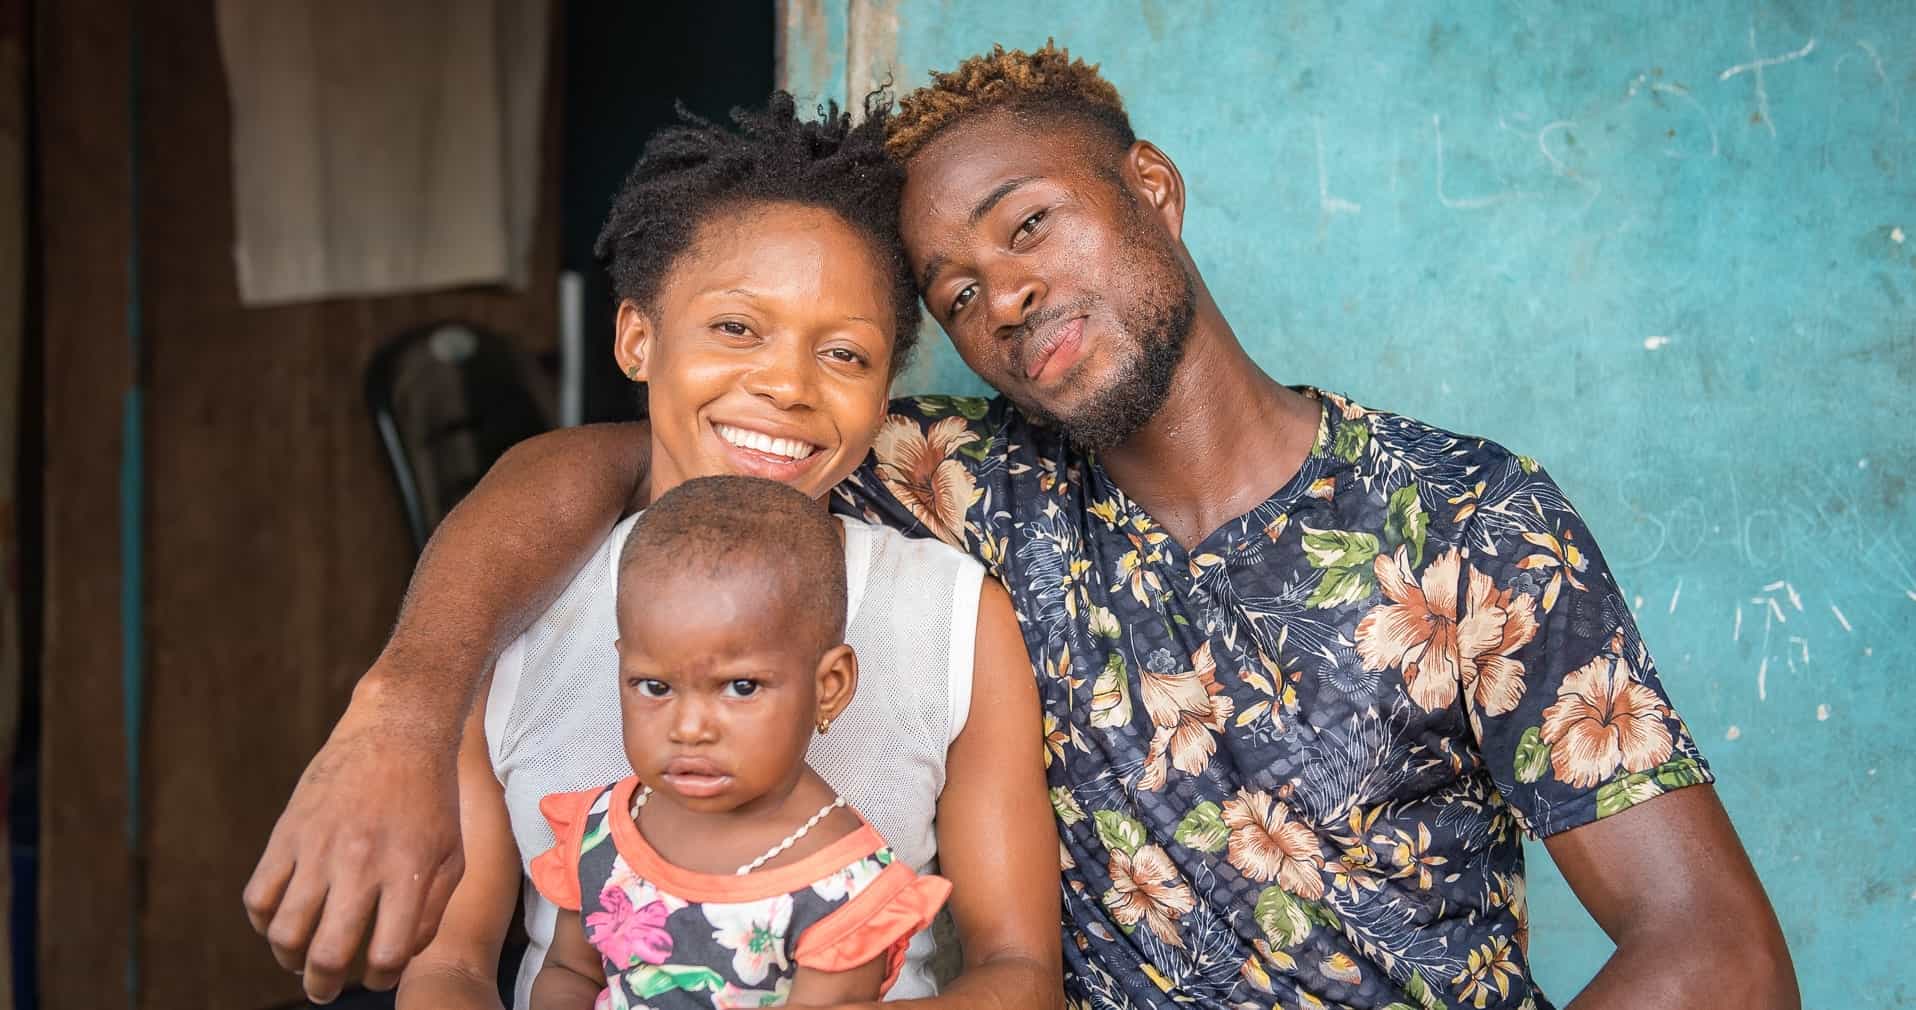 A young couple and their small daughter in Nigeria. Image credit: Seun Asala/Pathfinder